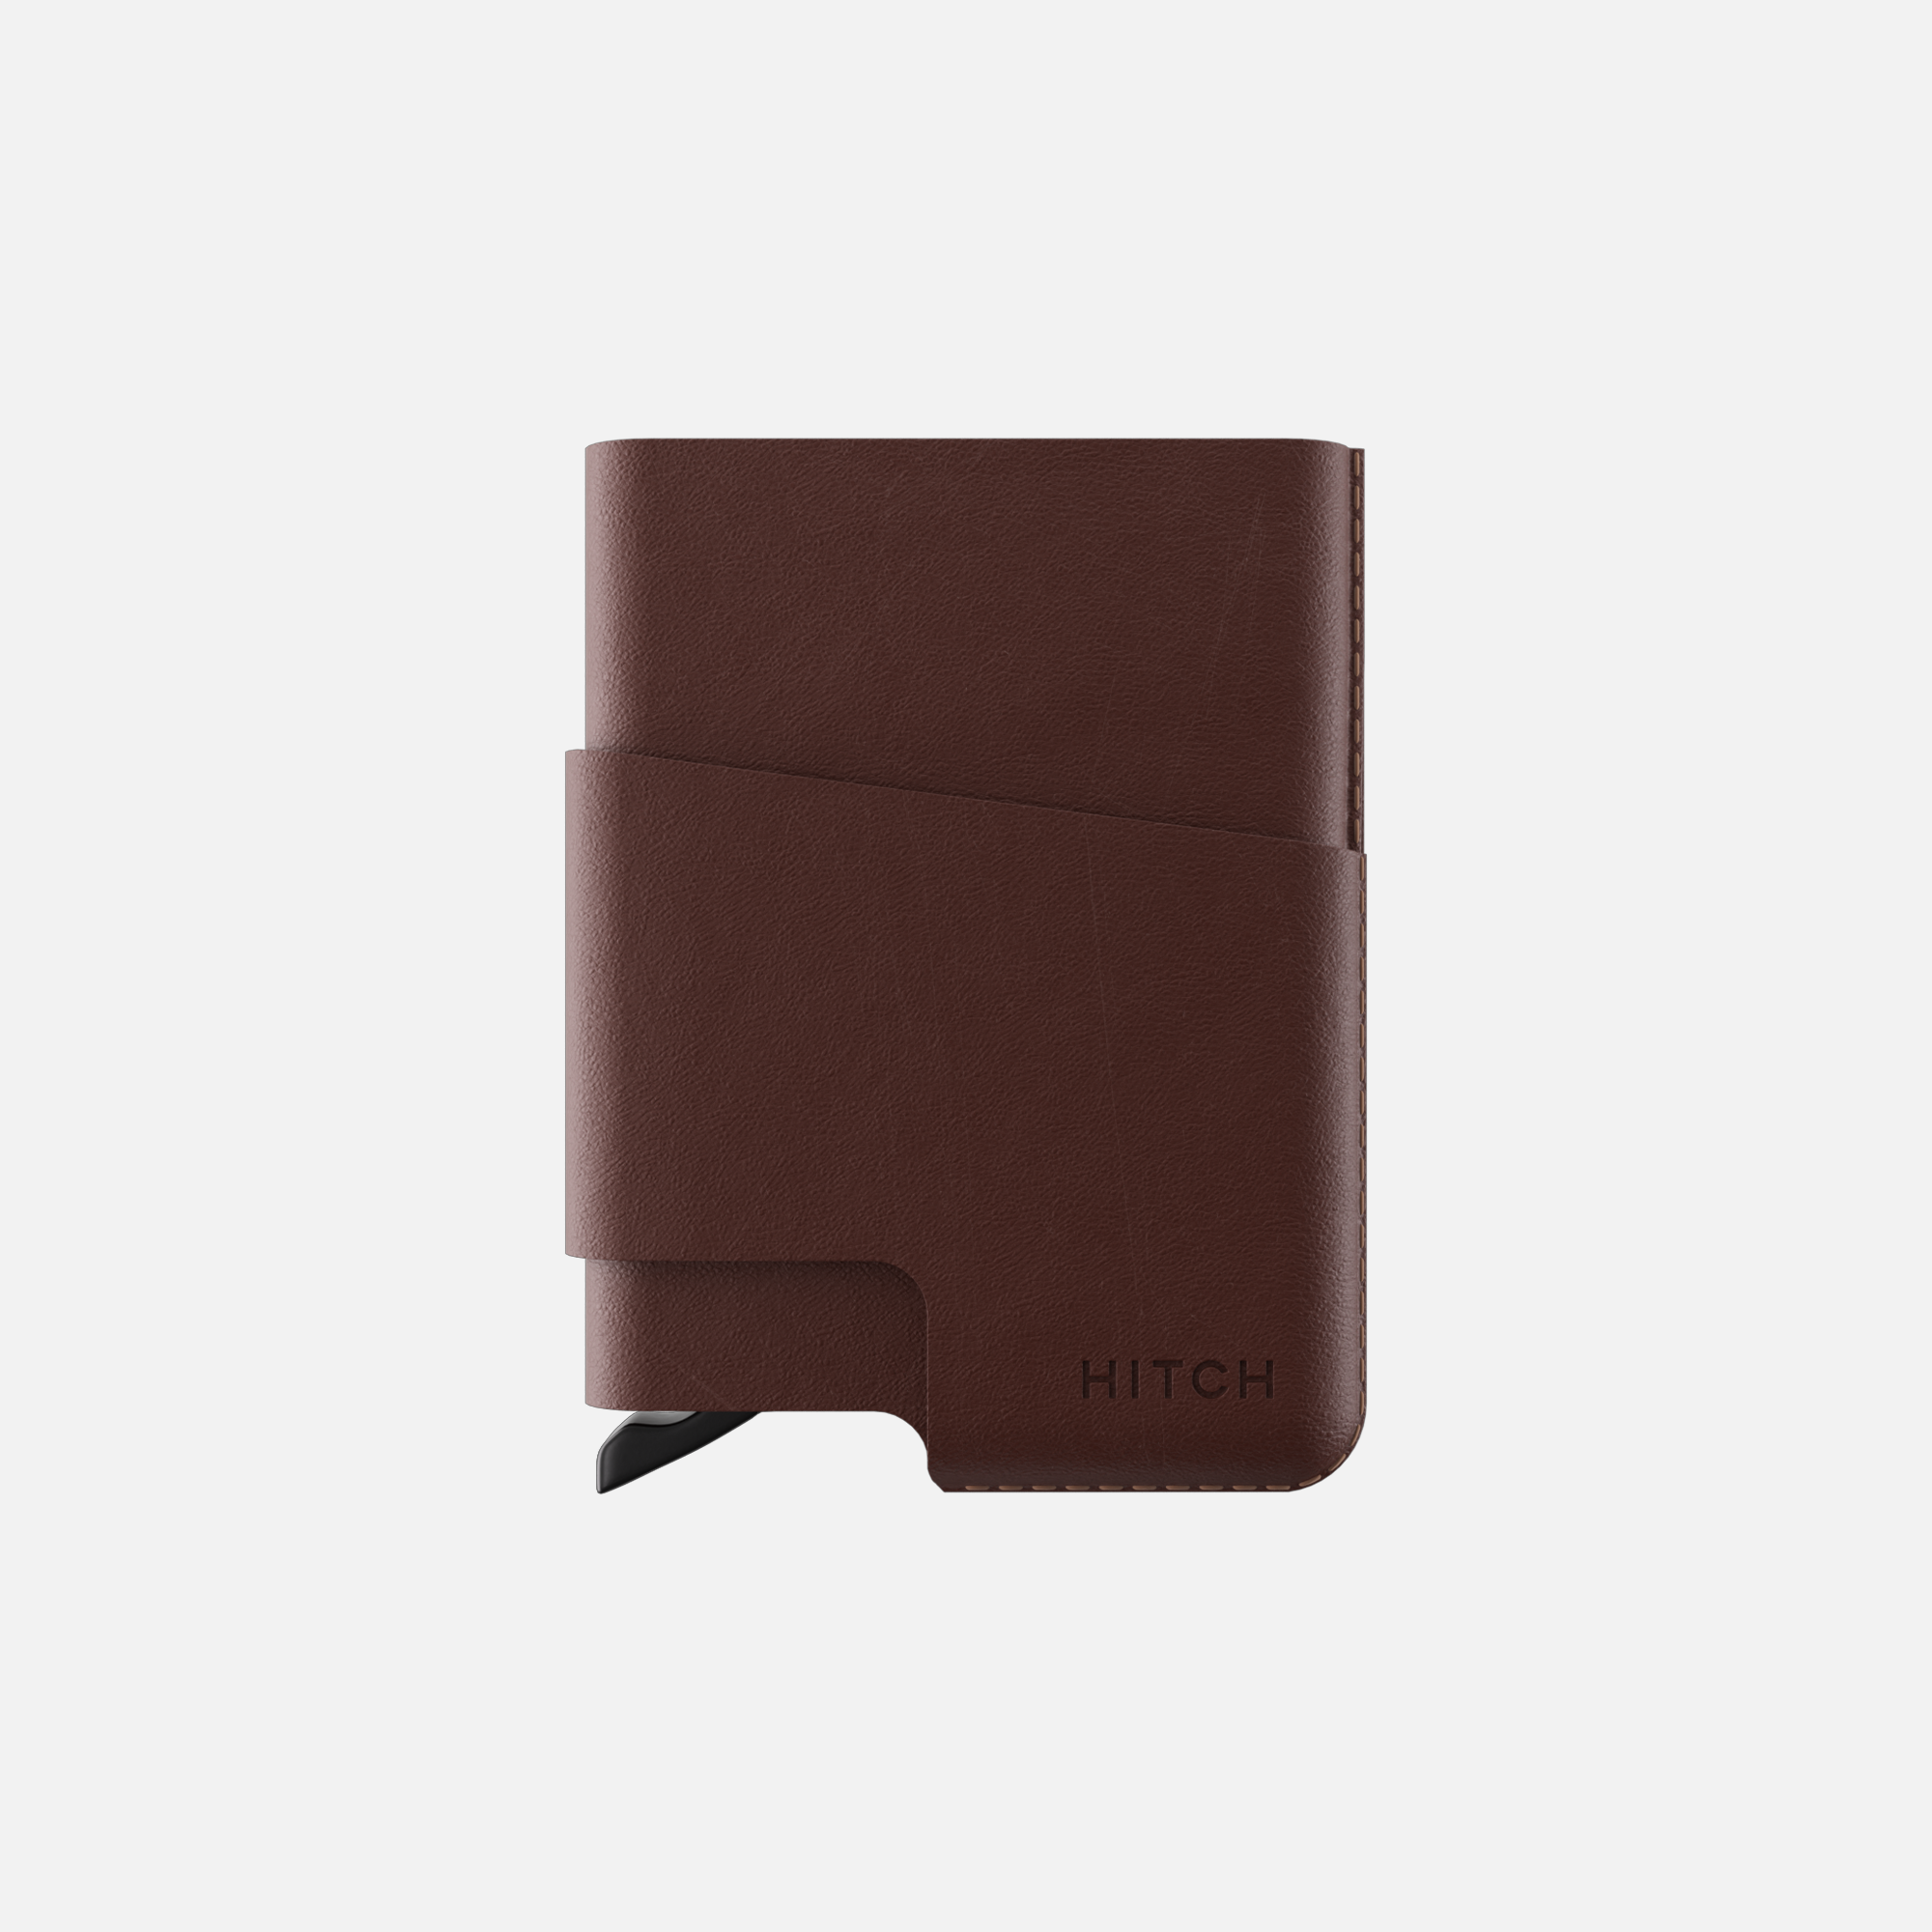 CUT-OUT Cardholder - RFID Block Featured - Handmade Natural Genuine Leather - Coffee Brown